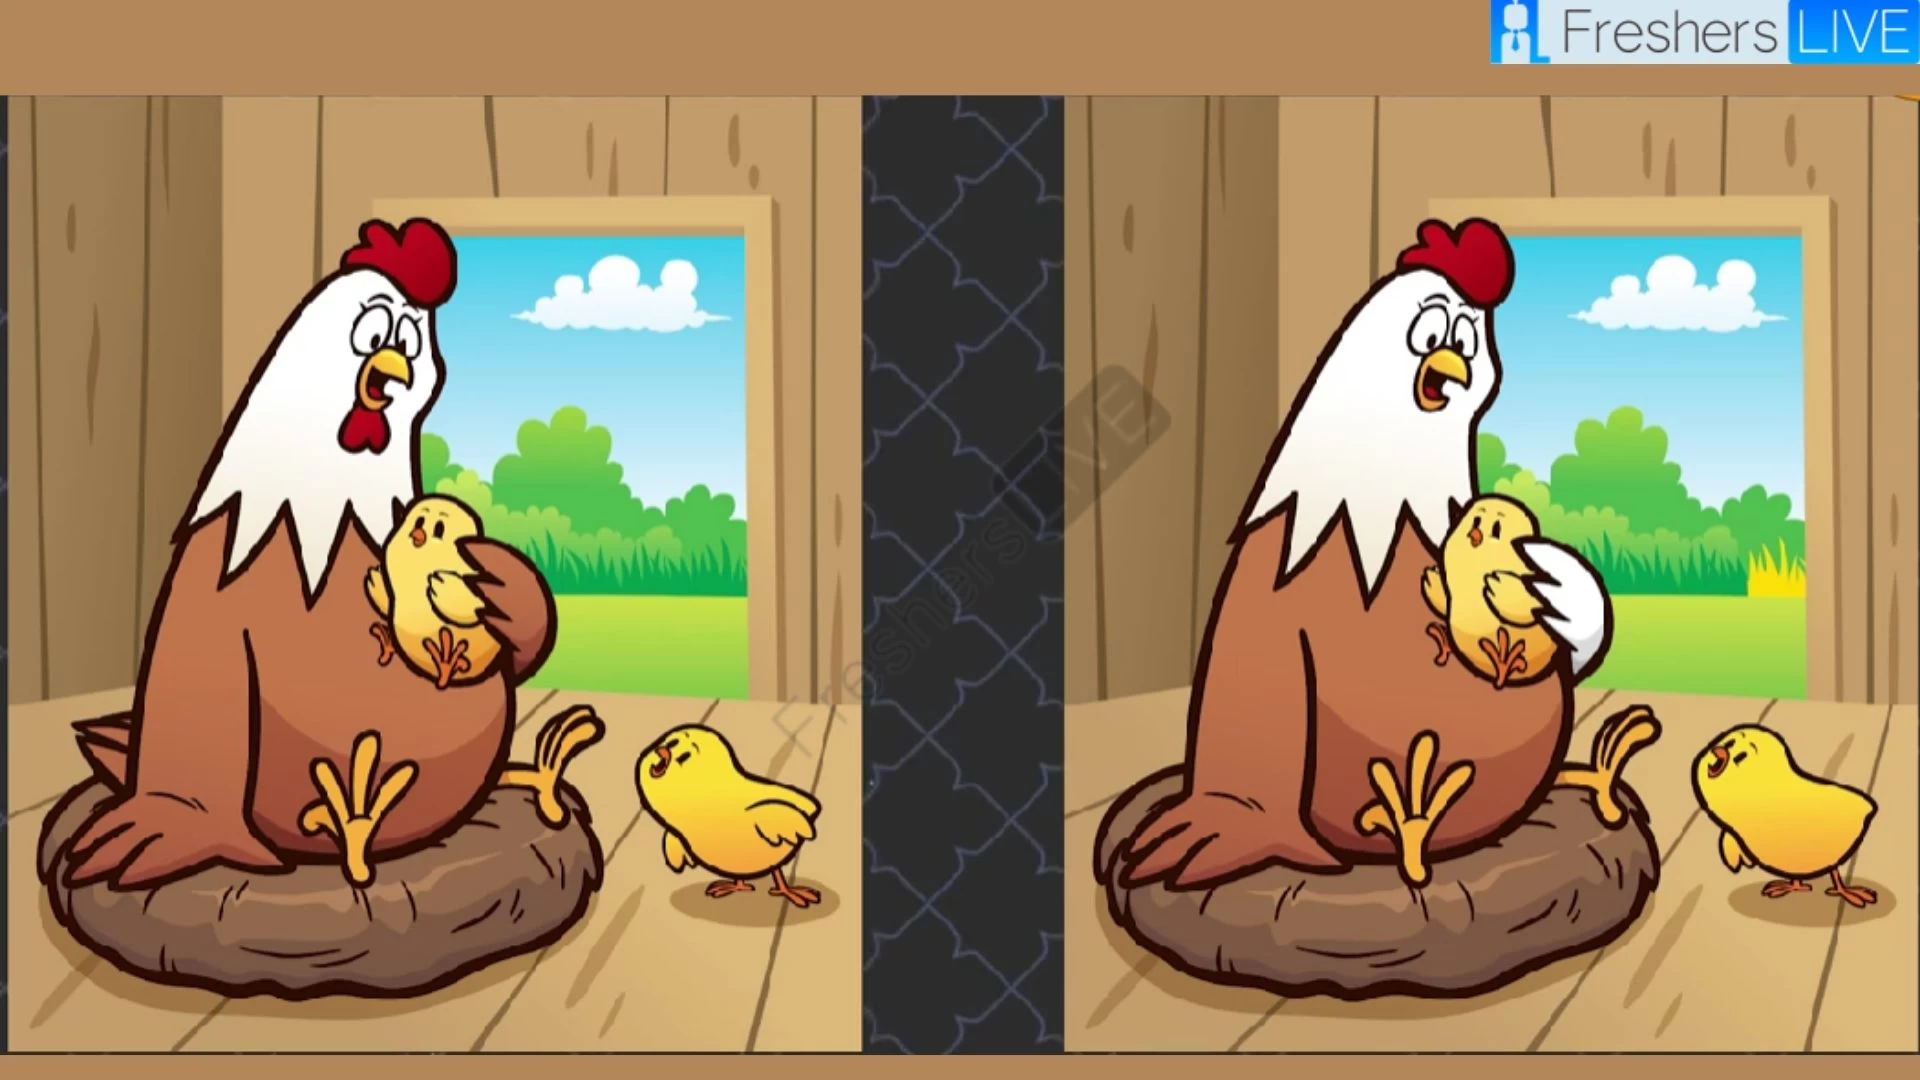 Spot 5 differences between the images of the Hen and the Chicken in just 12 seconds